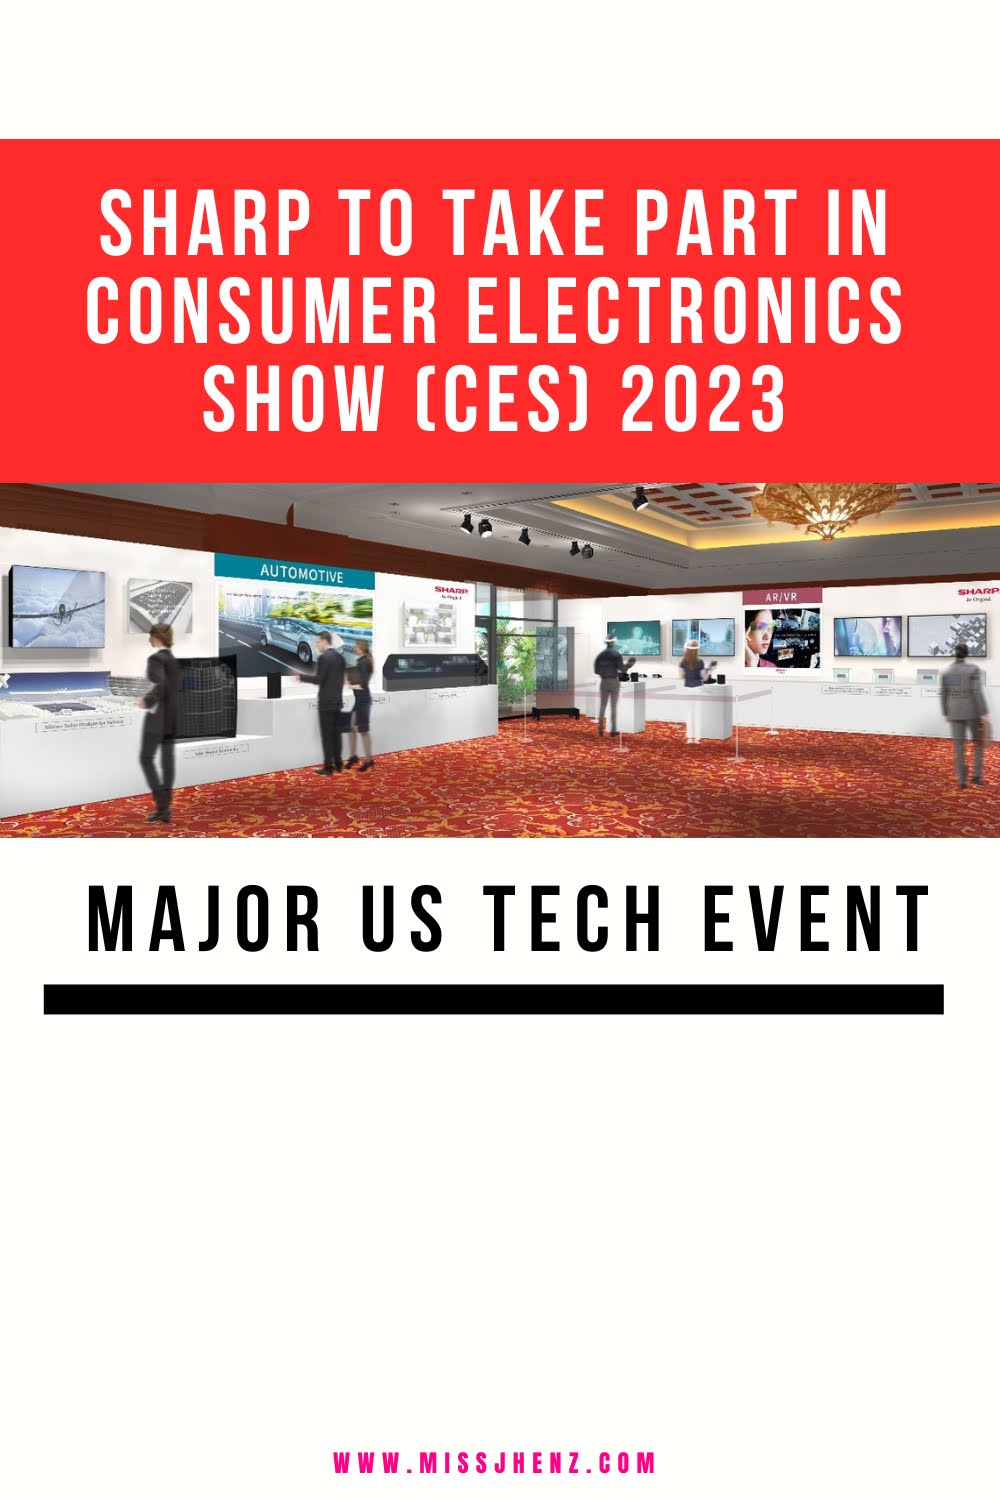 Sharp to Take Part in Consumer Electronics Show (CES) 2023, Major US Tech Event